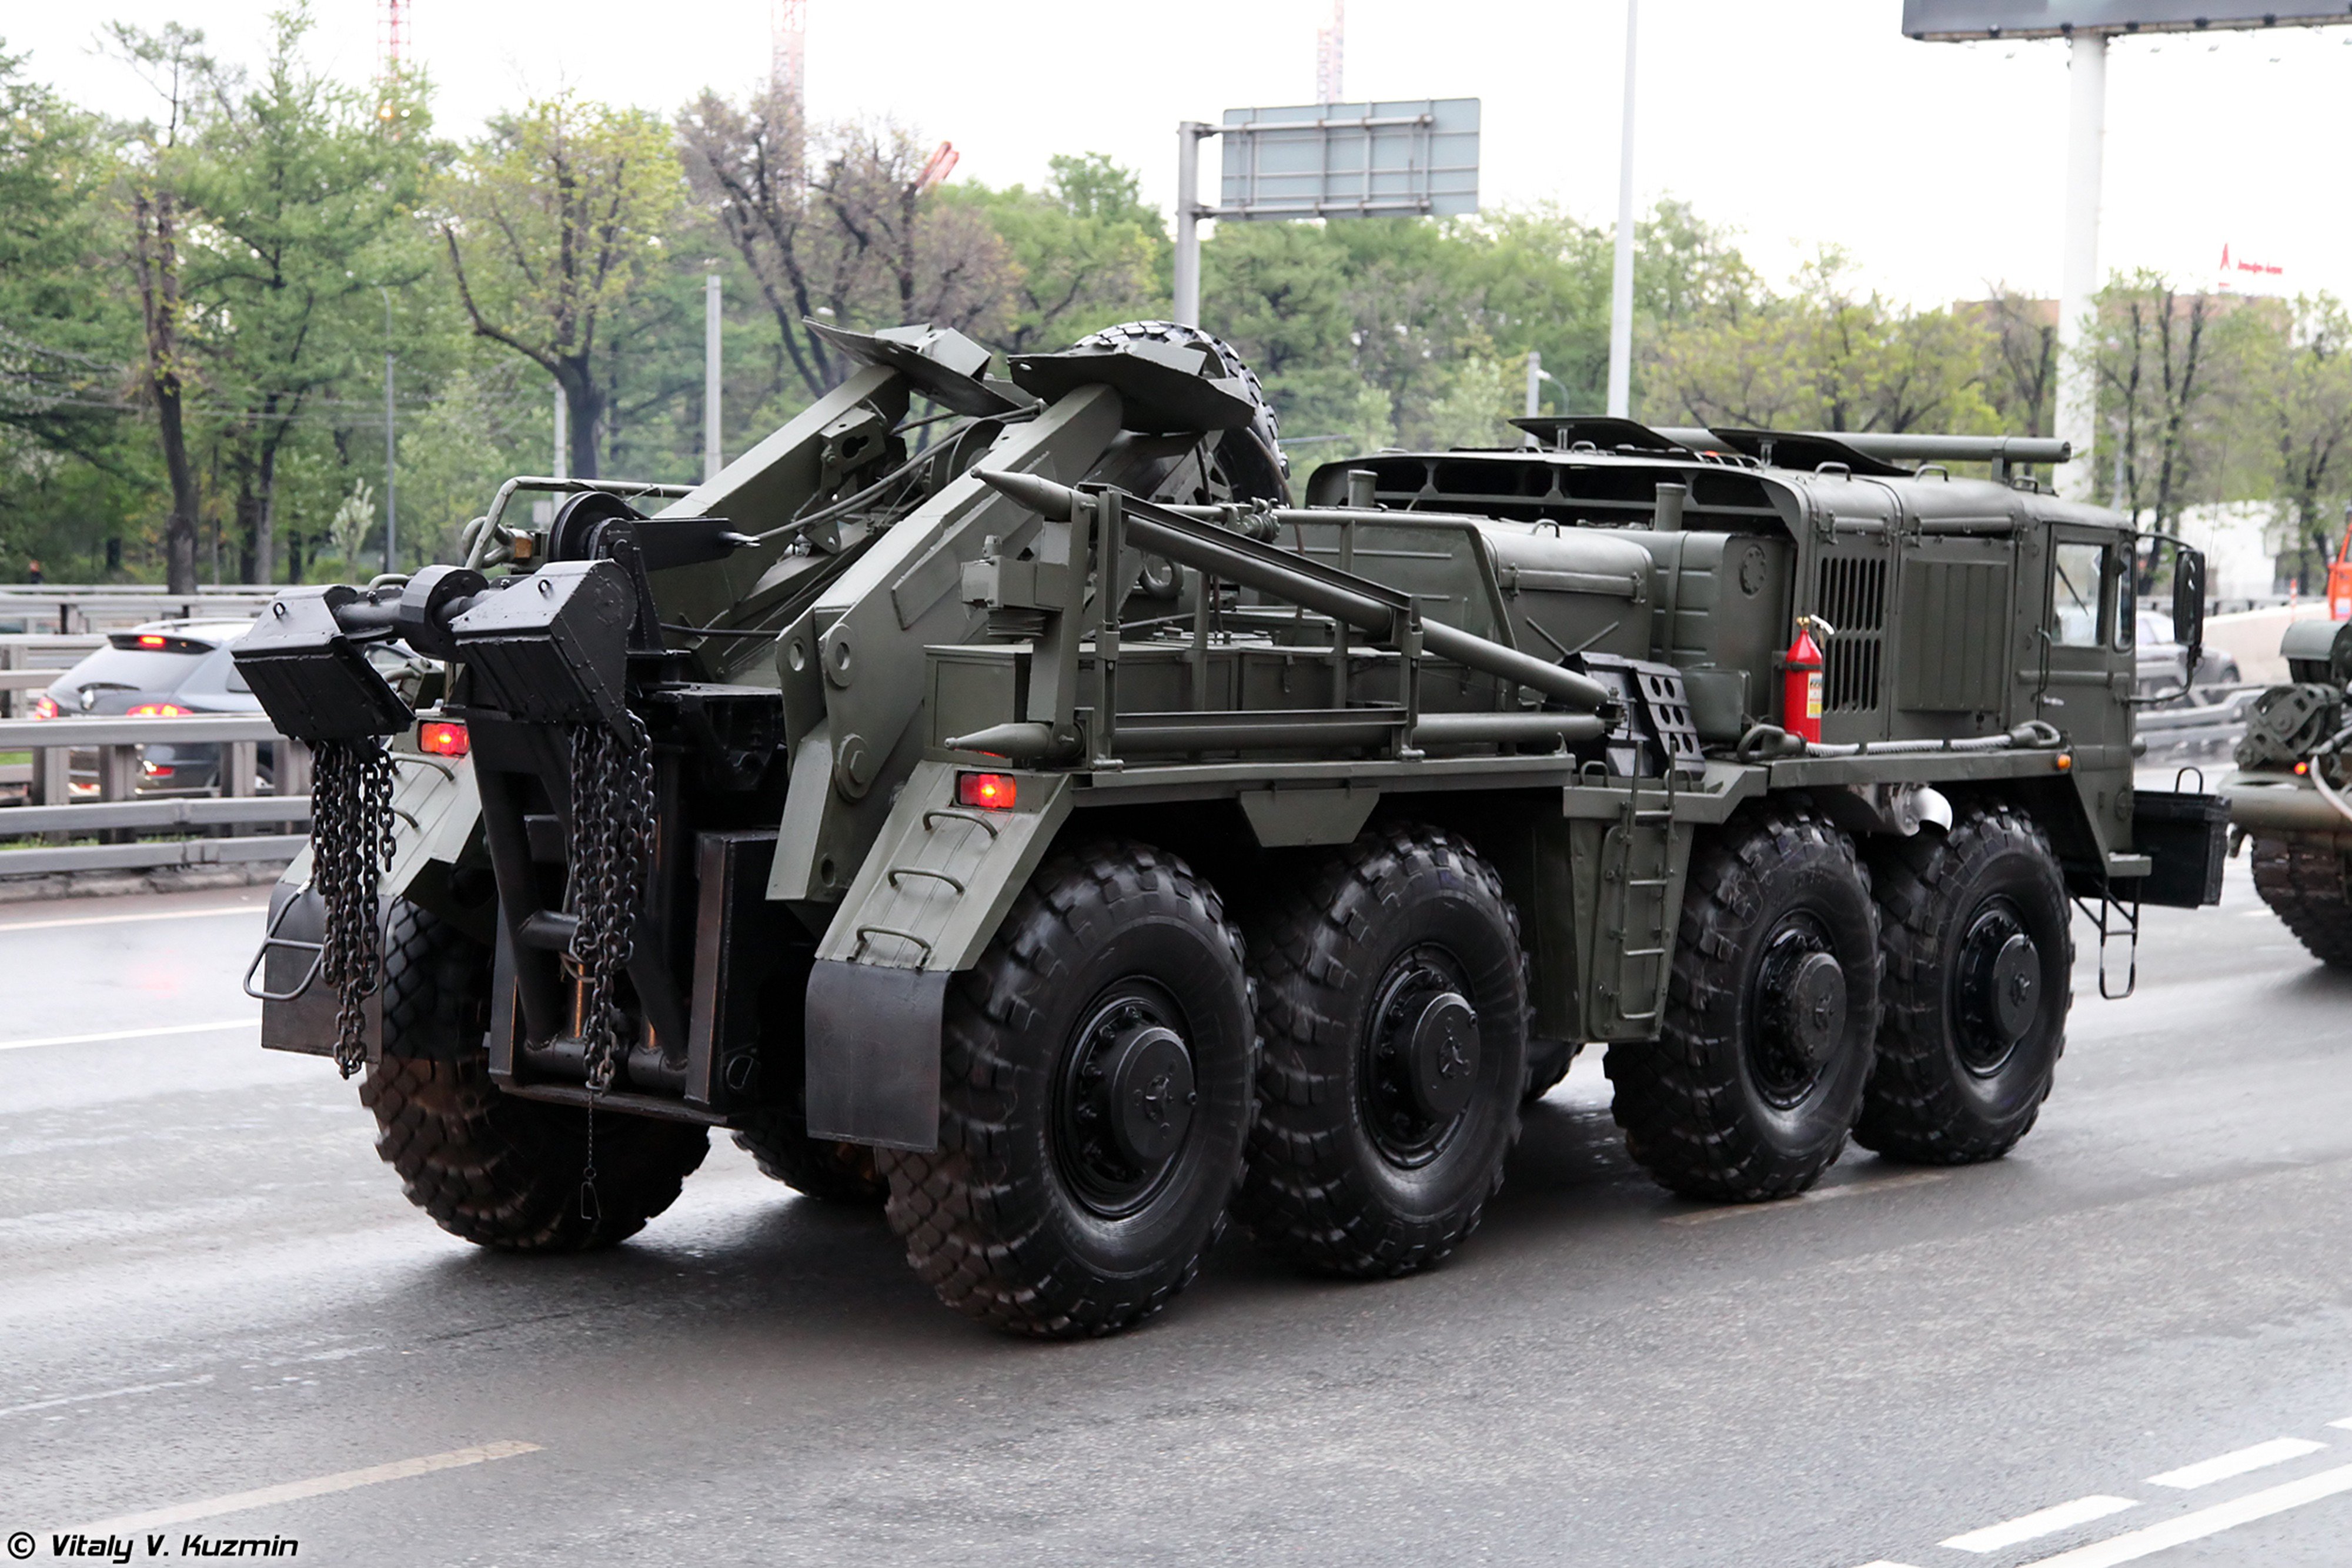 Wallpaper, 4000x2667 px, 5th, army, carrier, day, evacuation, in, ket, may, military, Moscow, of, parade, red, rehearsal, Russia, Russian, star, t, Truck, Victory, wheeled 4000x2667